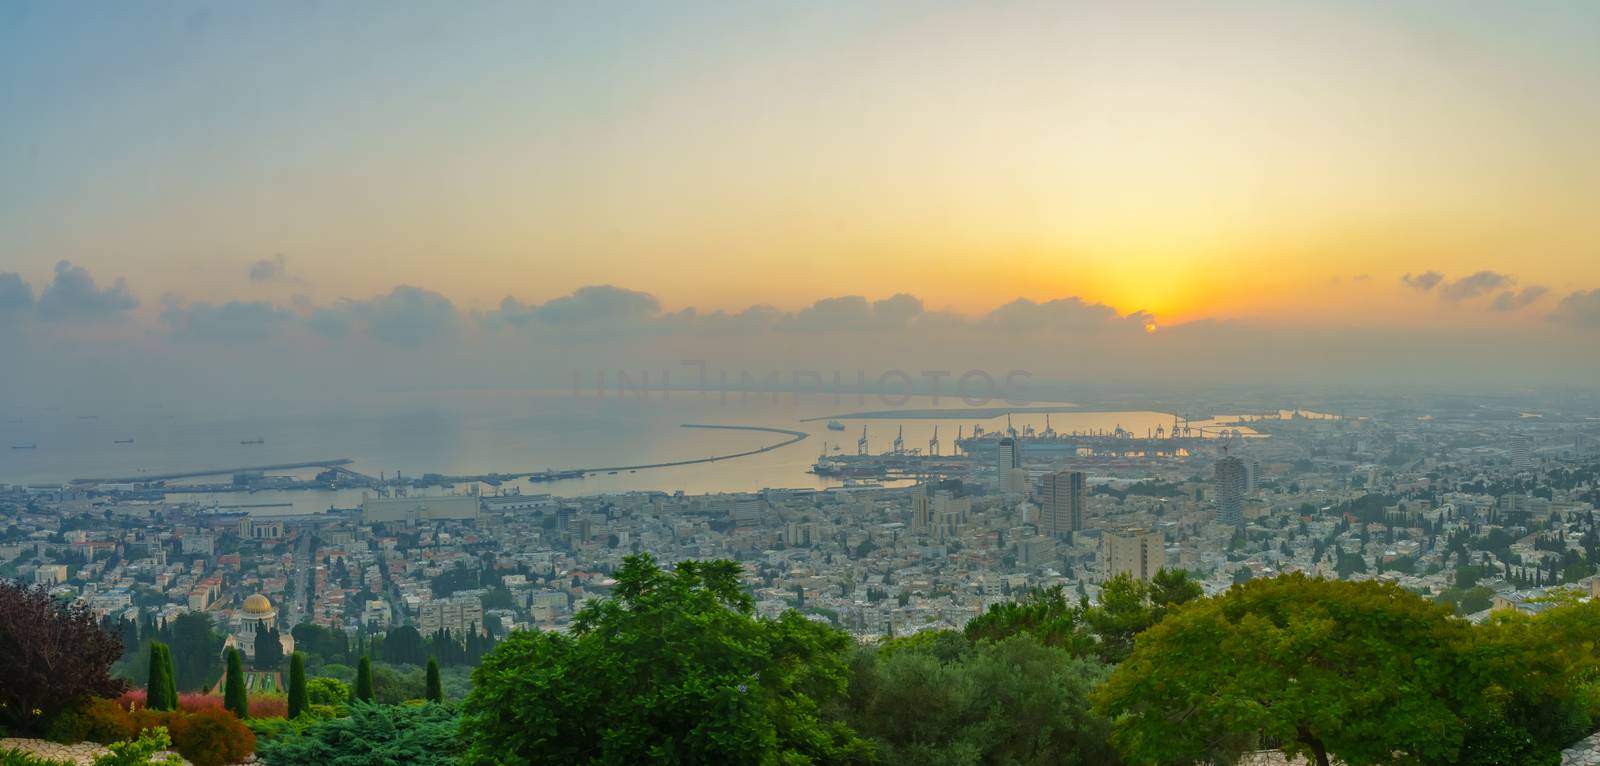 Sunrise panorama of downtown Haifa, the port, and the bay by RnDmS